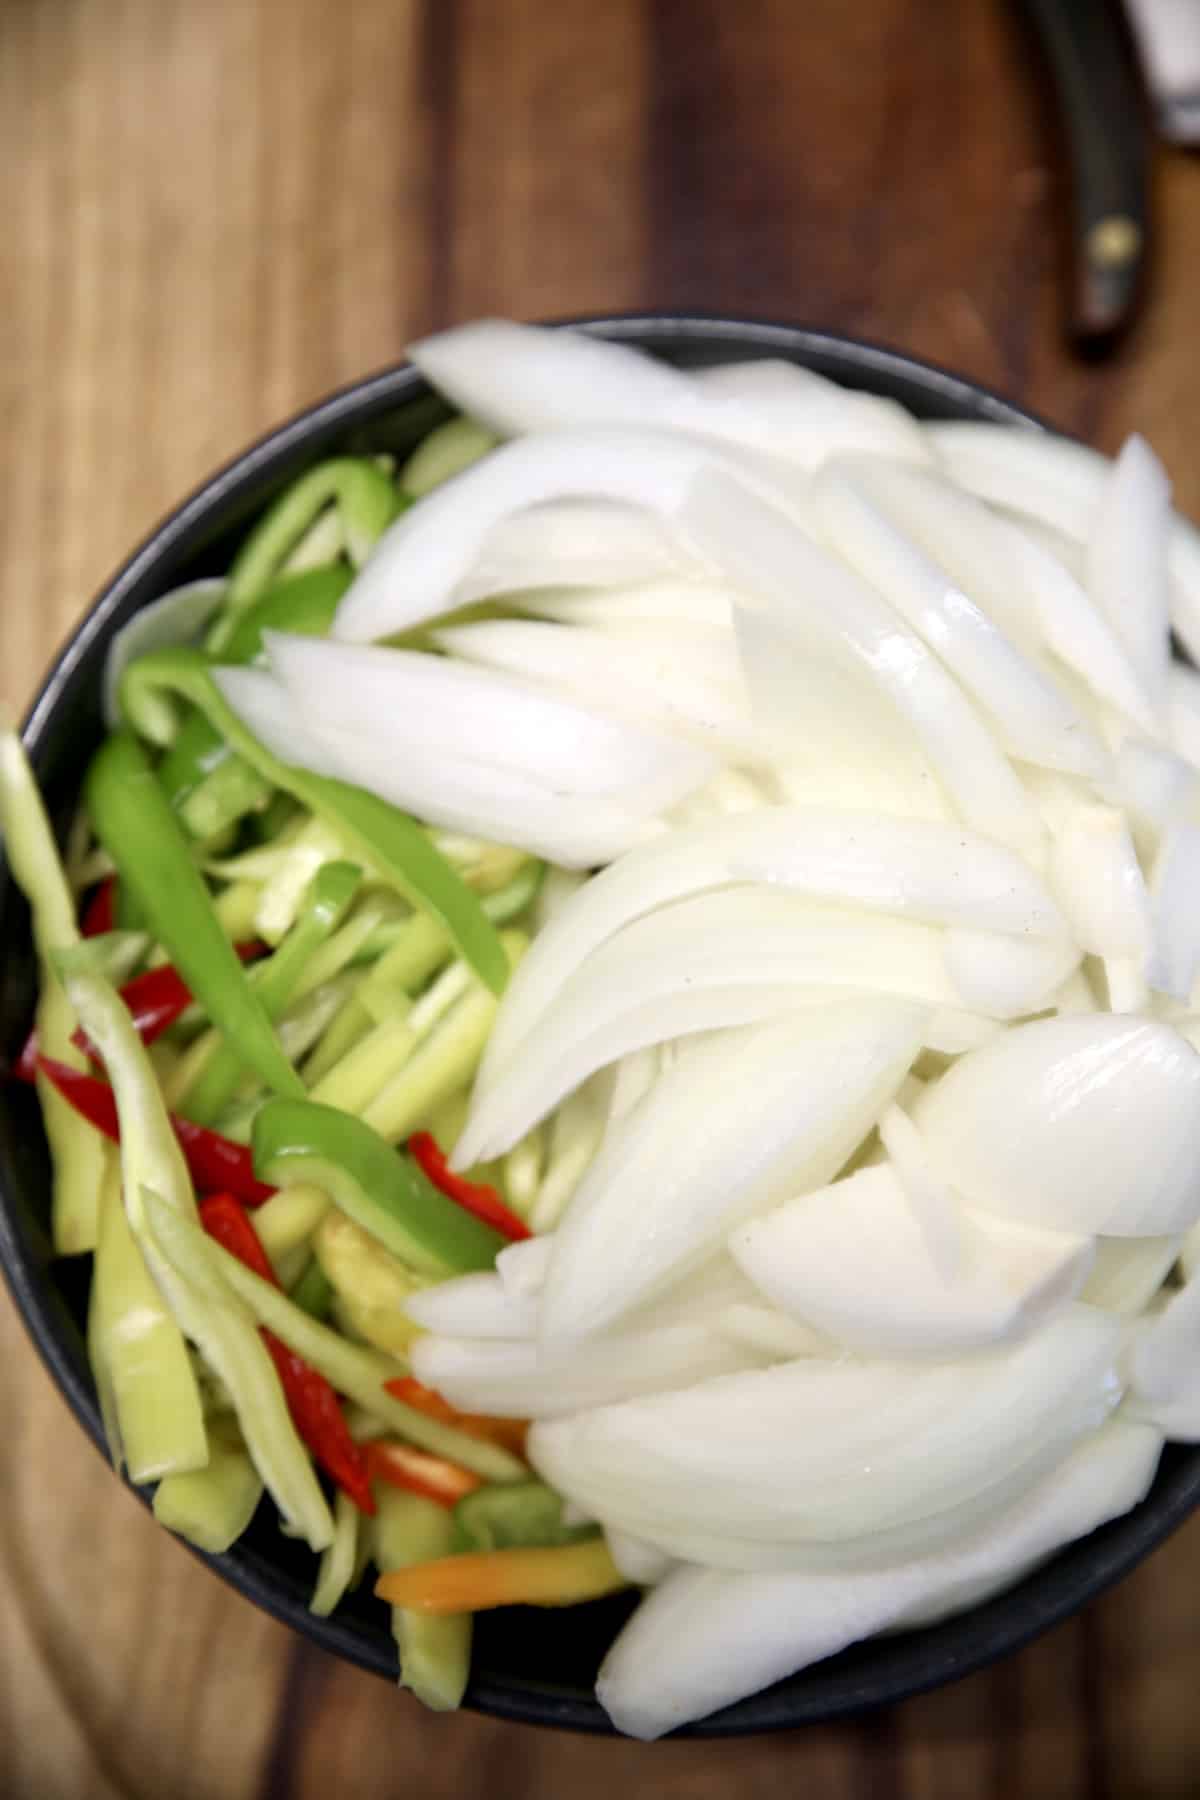 Sliced peppers, onions in a bowl.